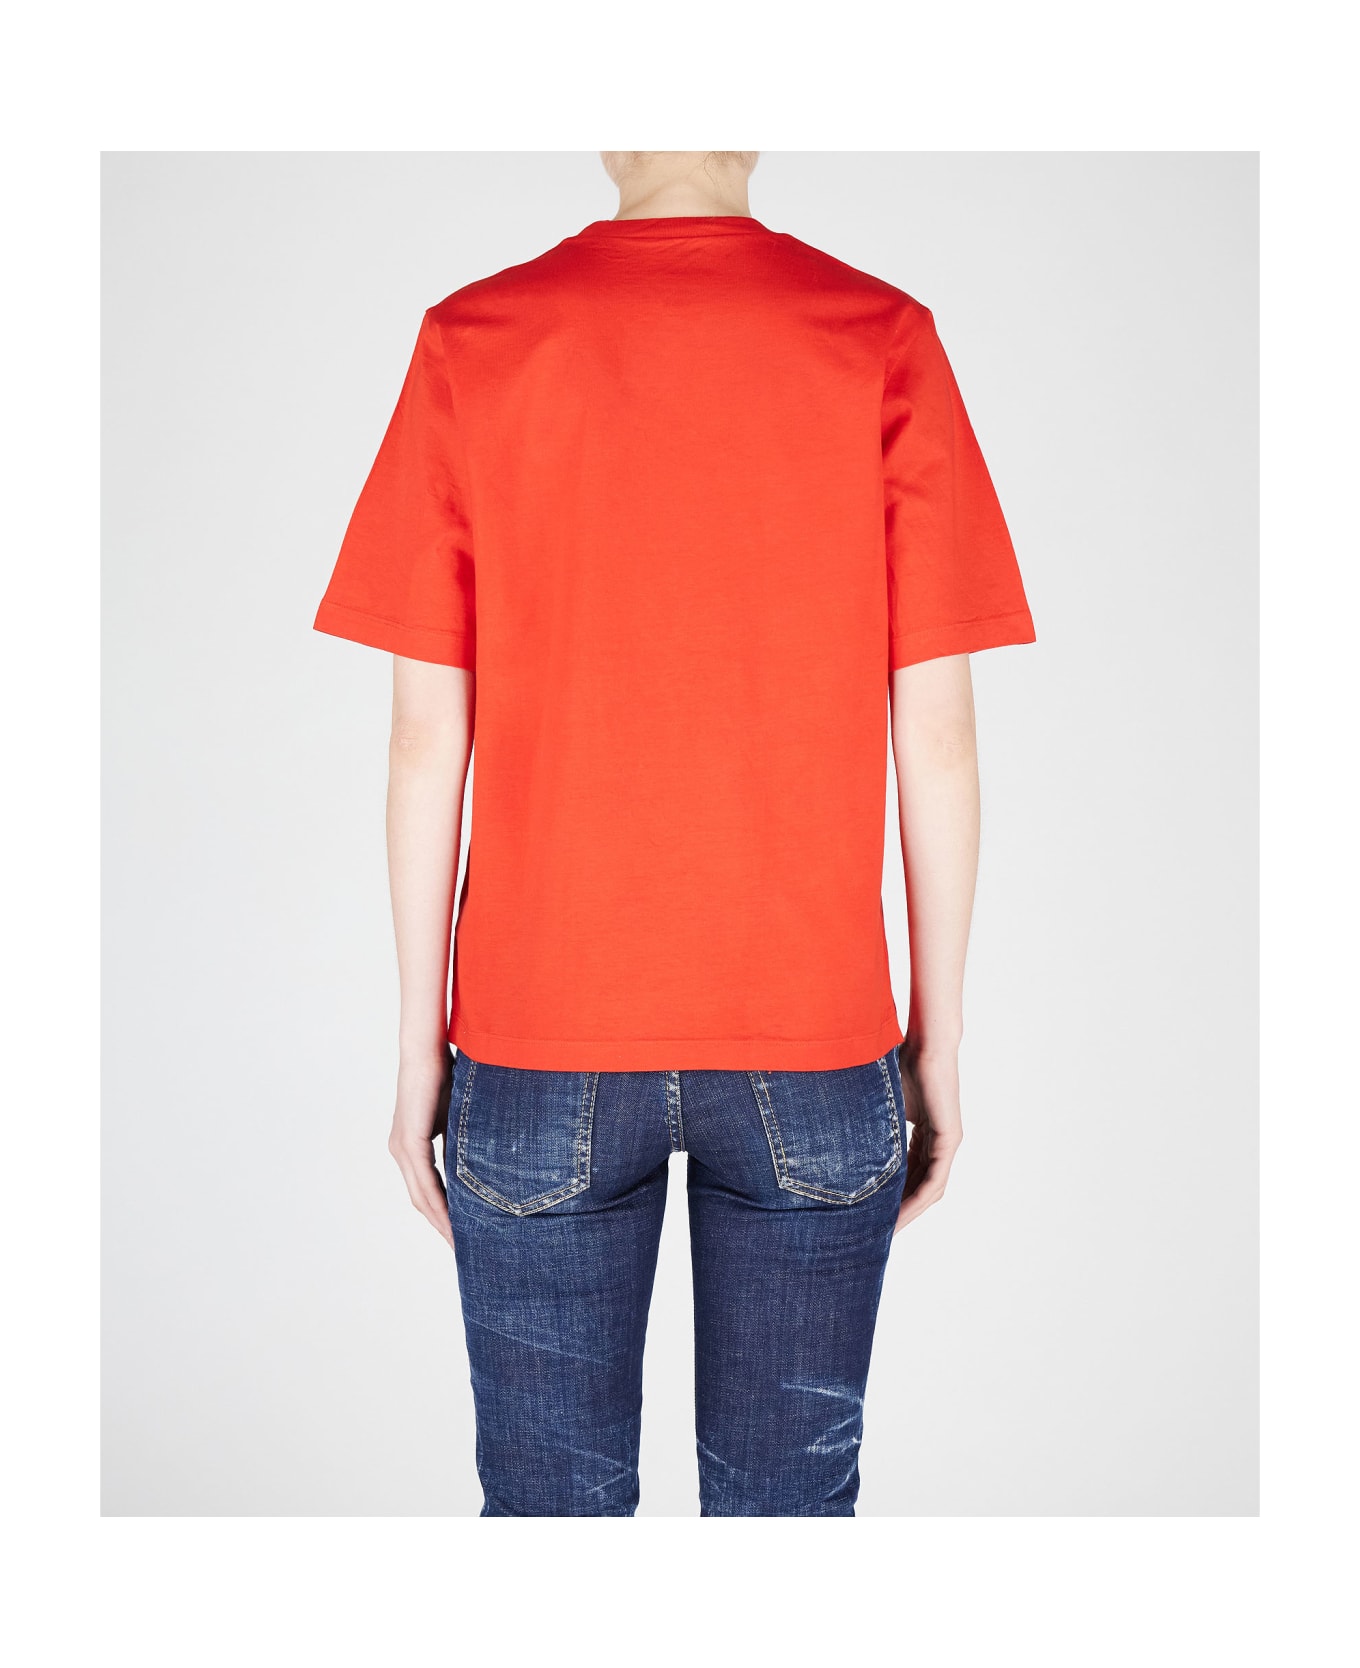 Dsquared2 'lunar N.y. Easy' T-shirt - Red Tシャツ